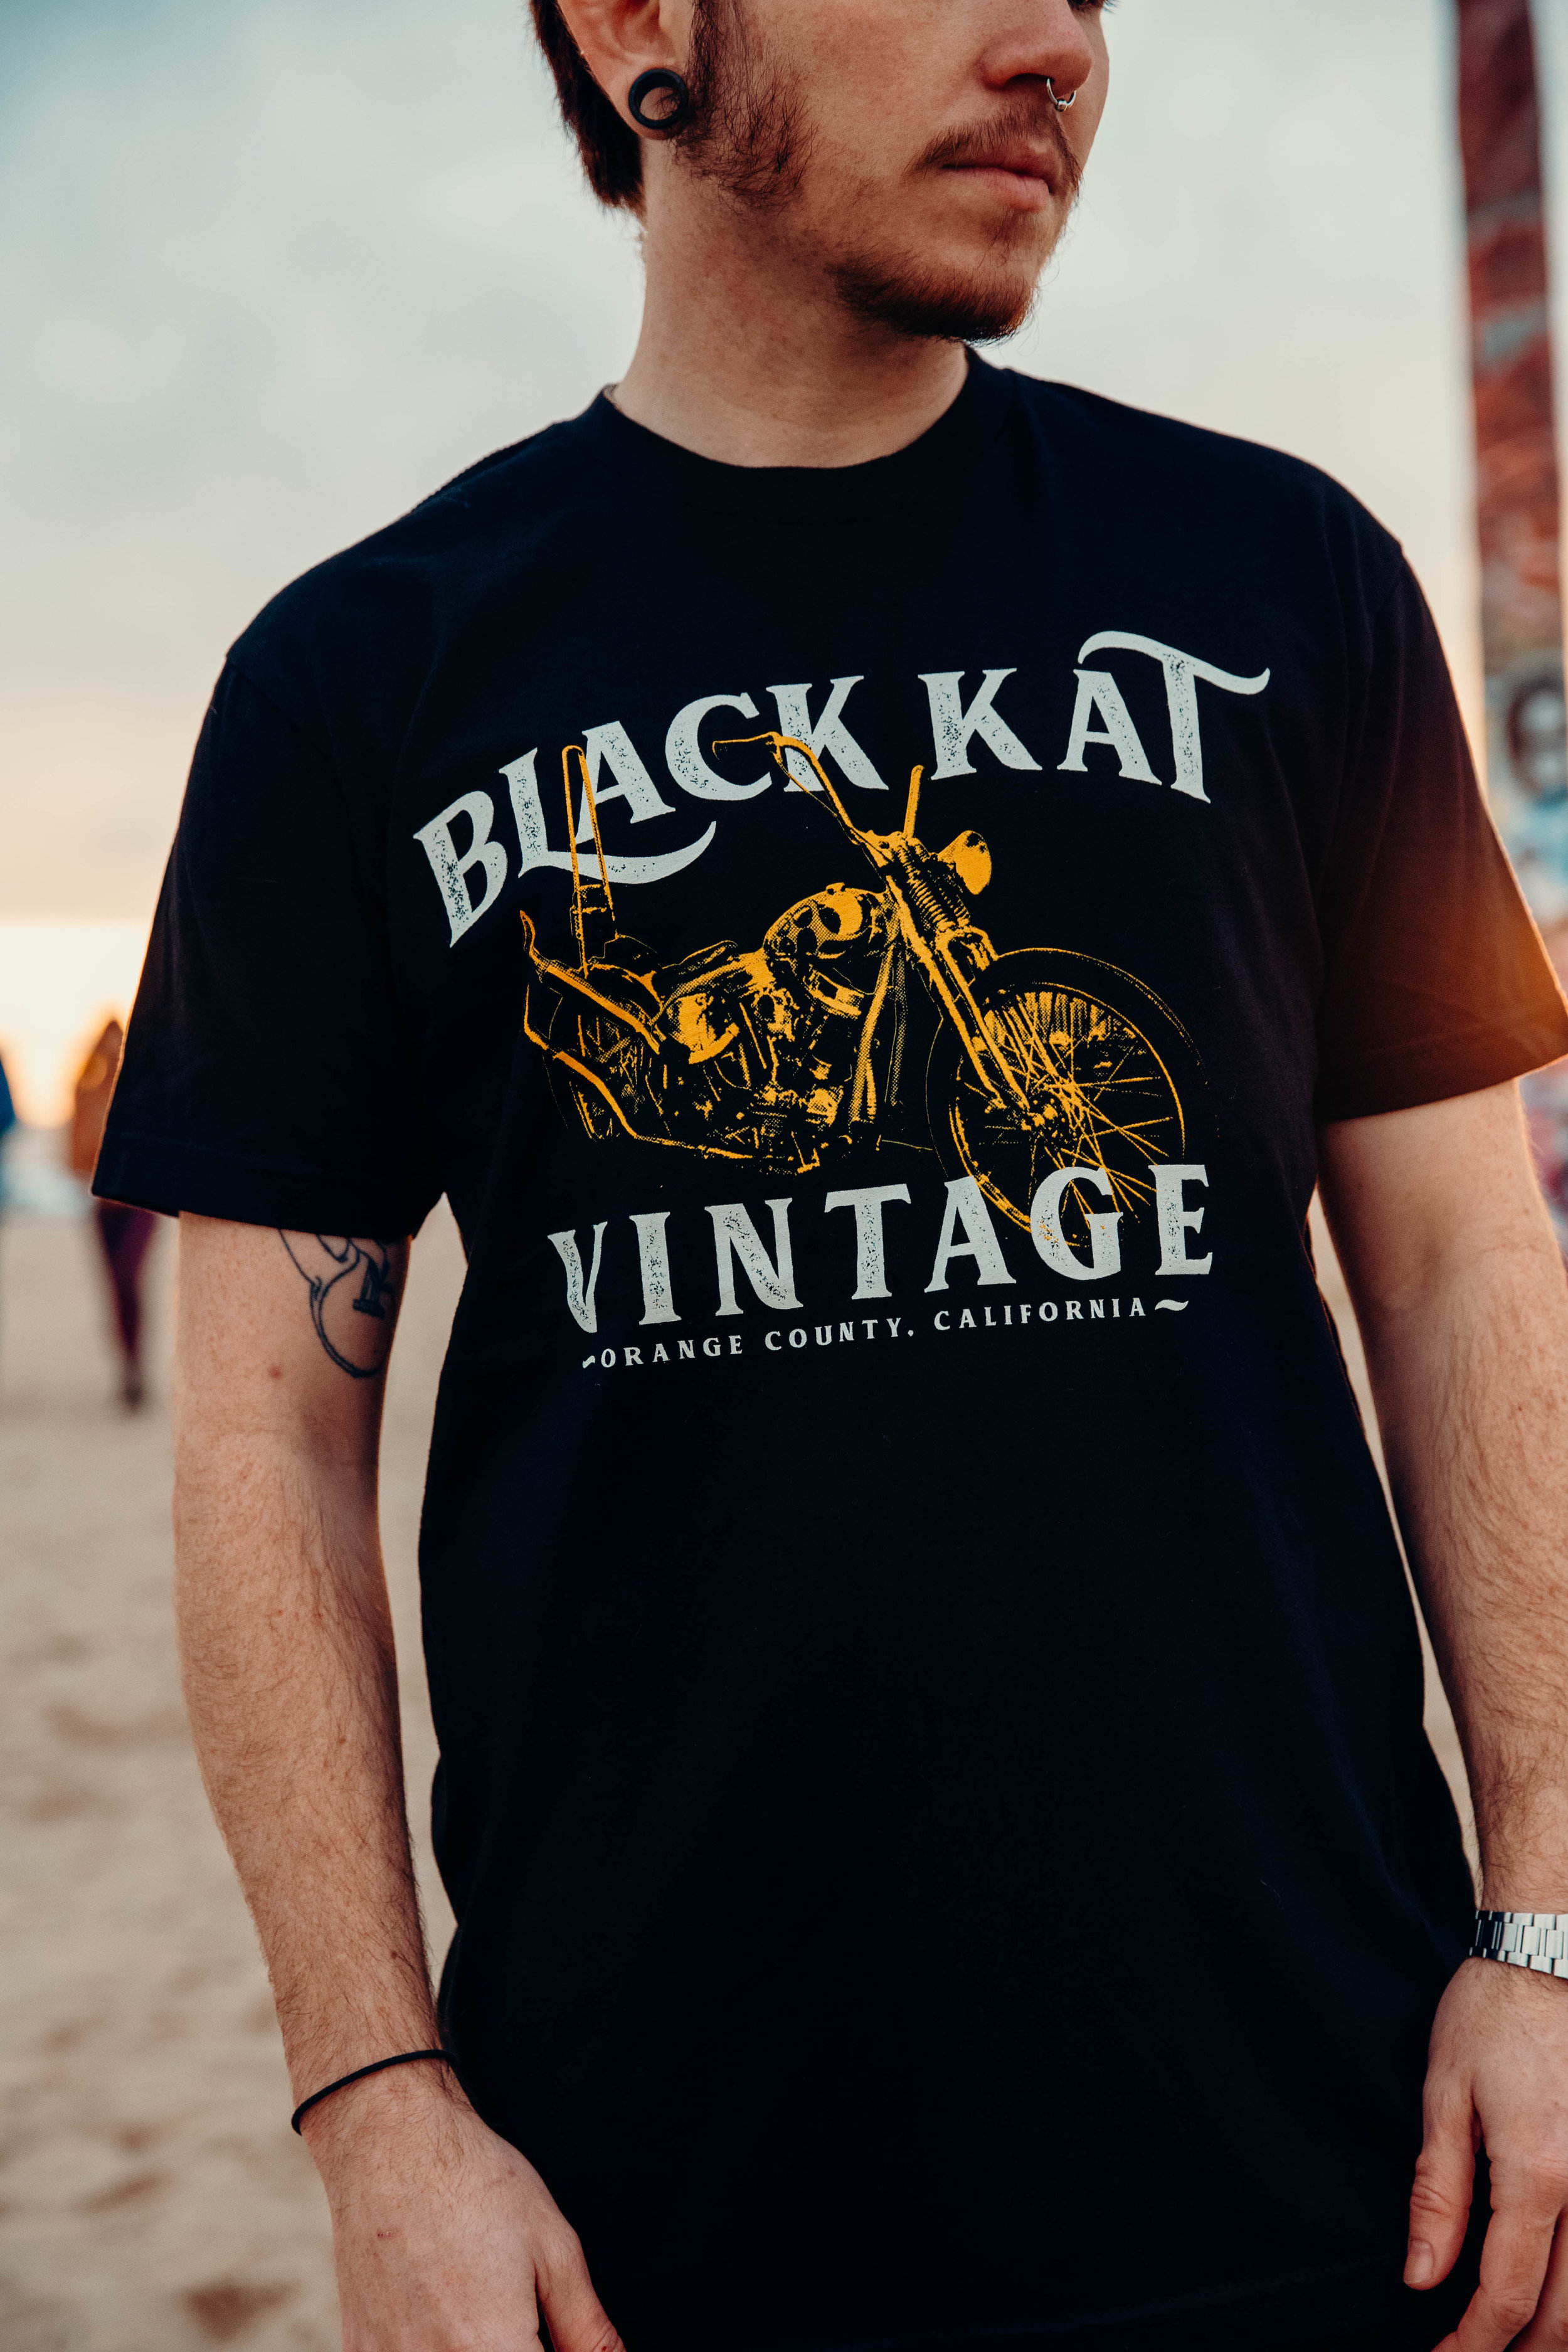  Black Kat Vintage by Mike Ness 